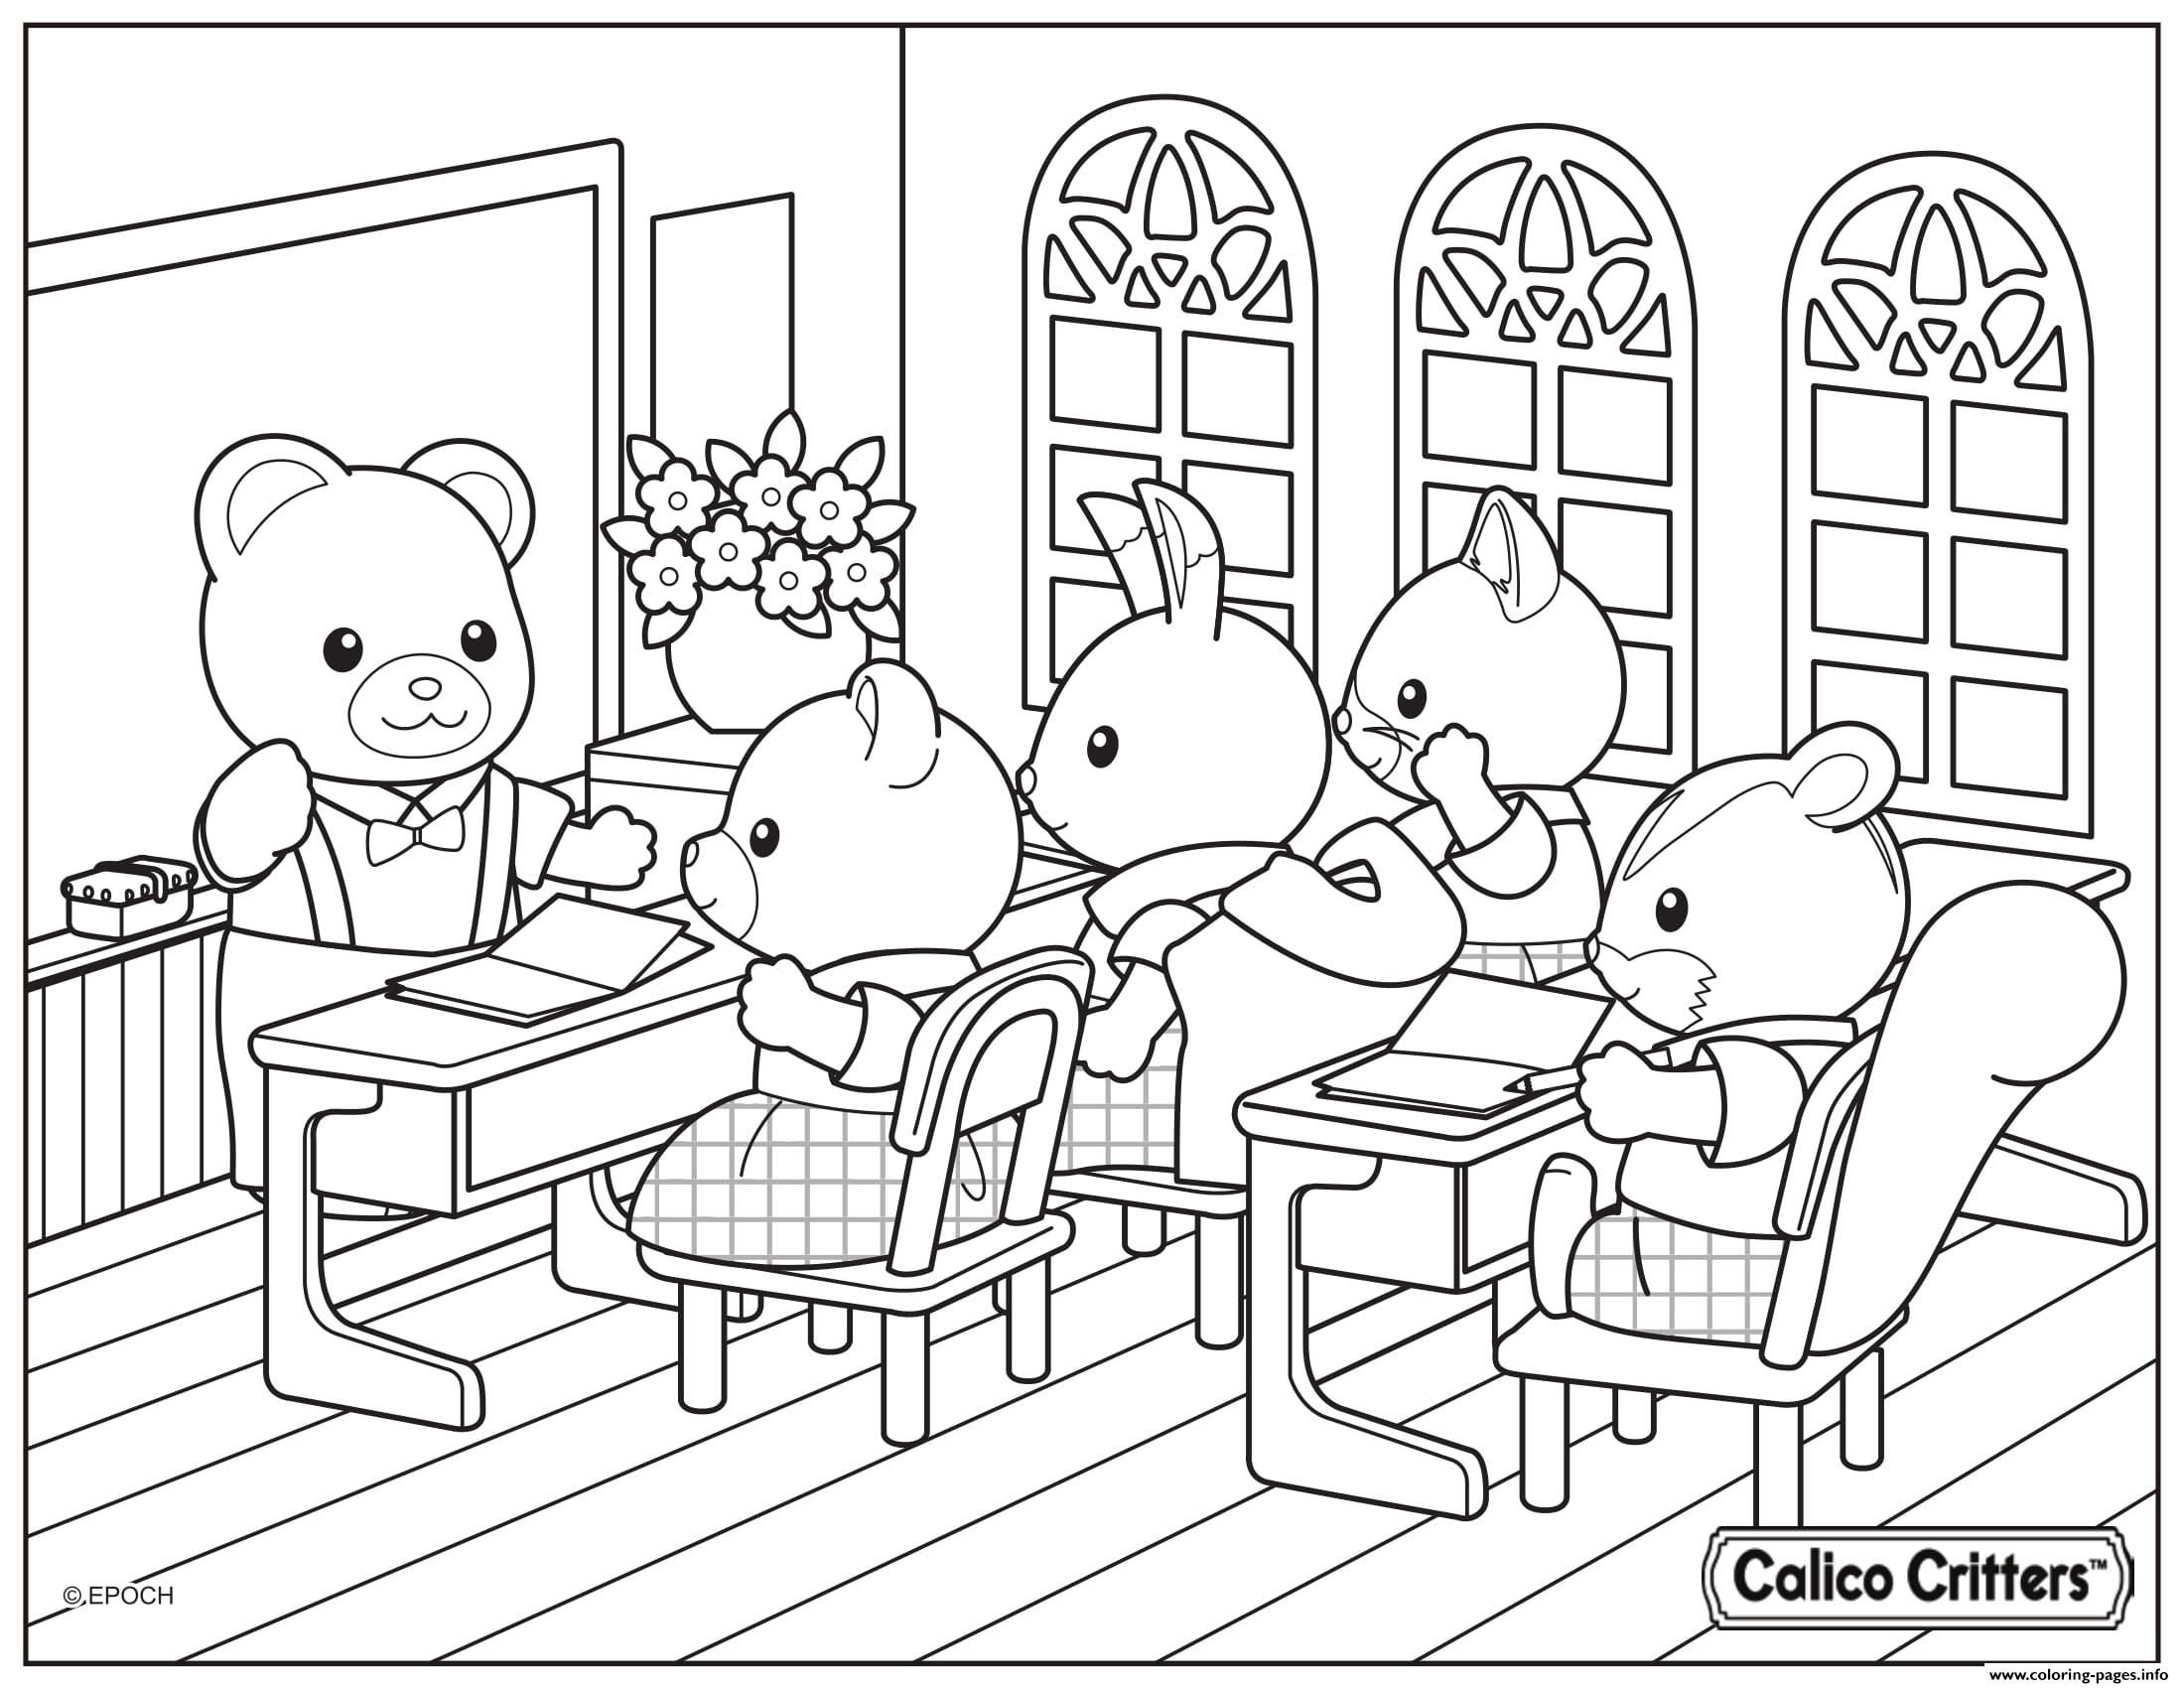 Calico Critters School Learning Coloring Pages Printable